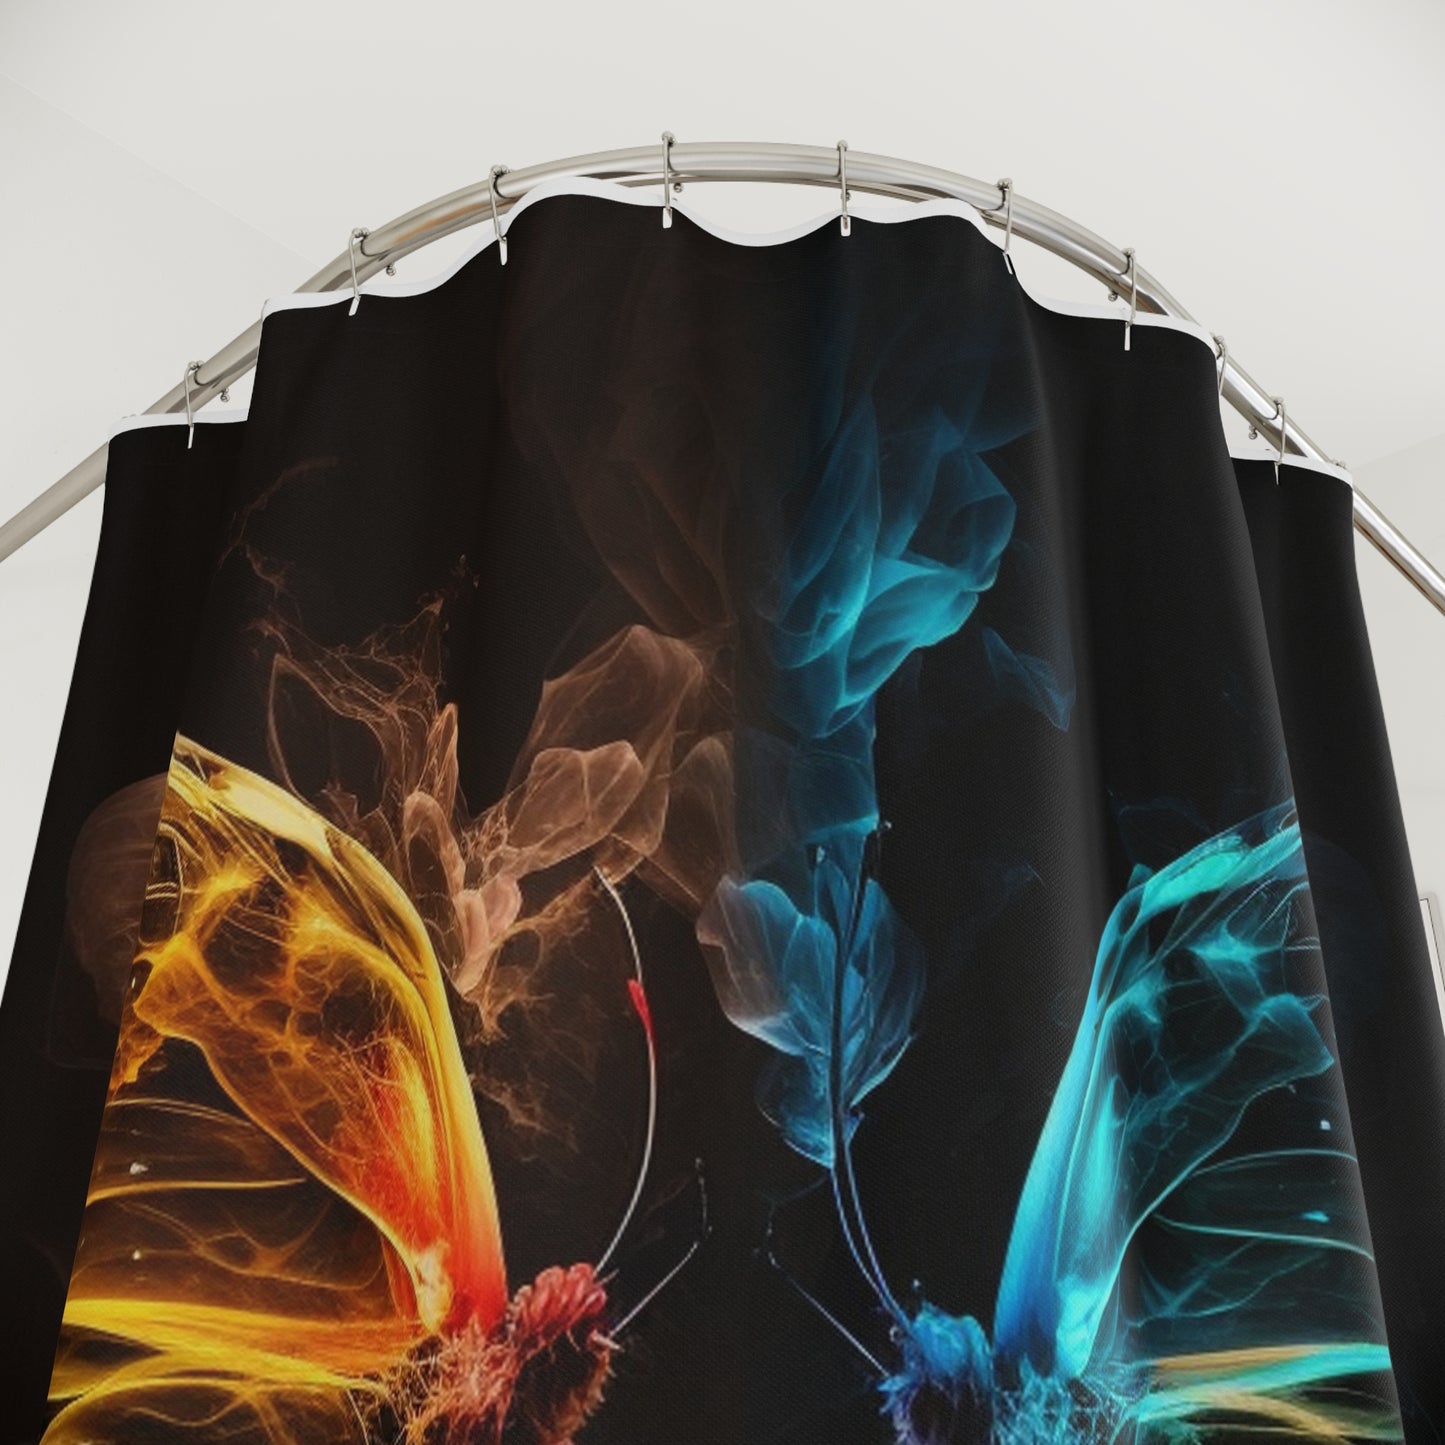 Polyester Shower Curtain Kiss Neon Butterfly 8